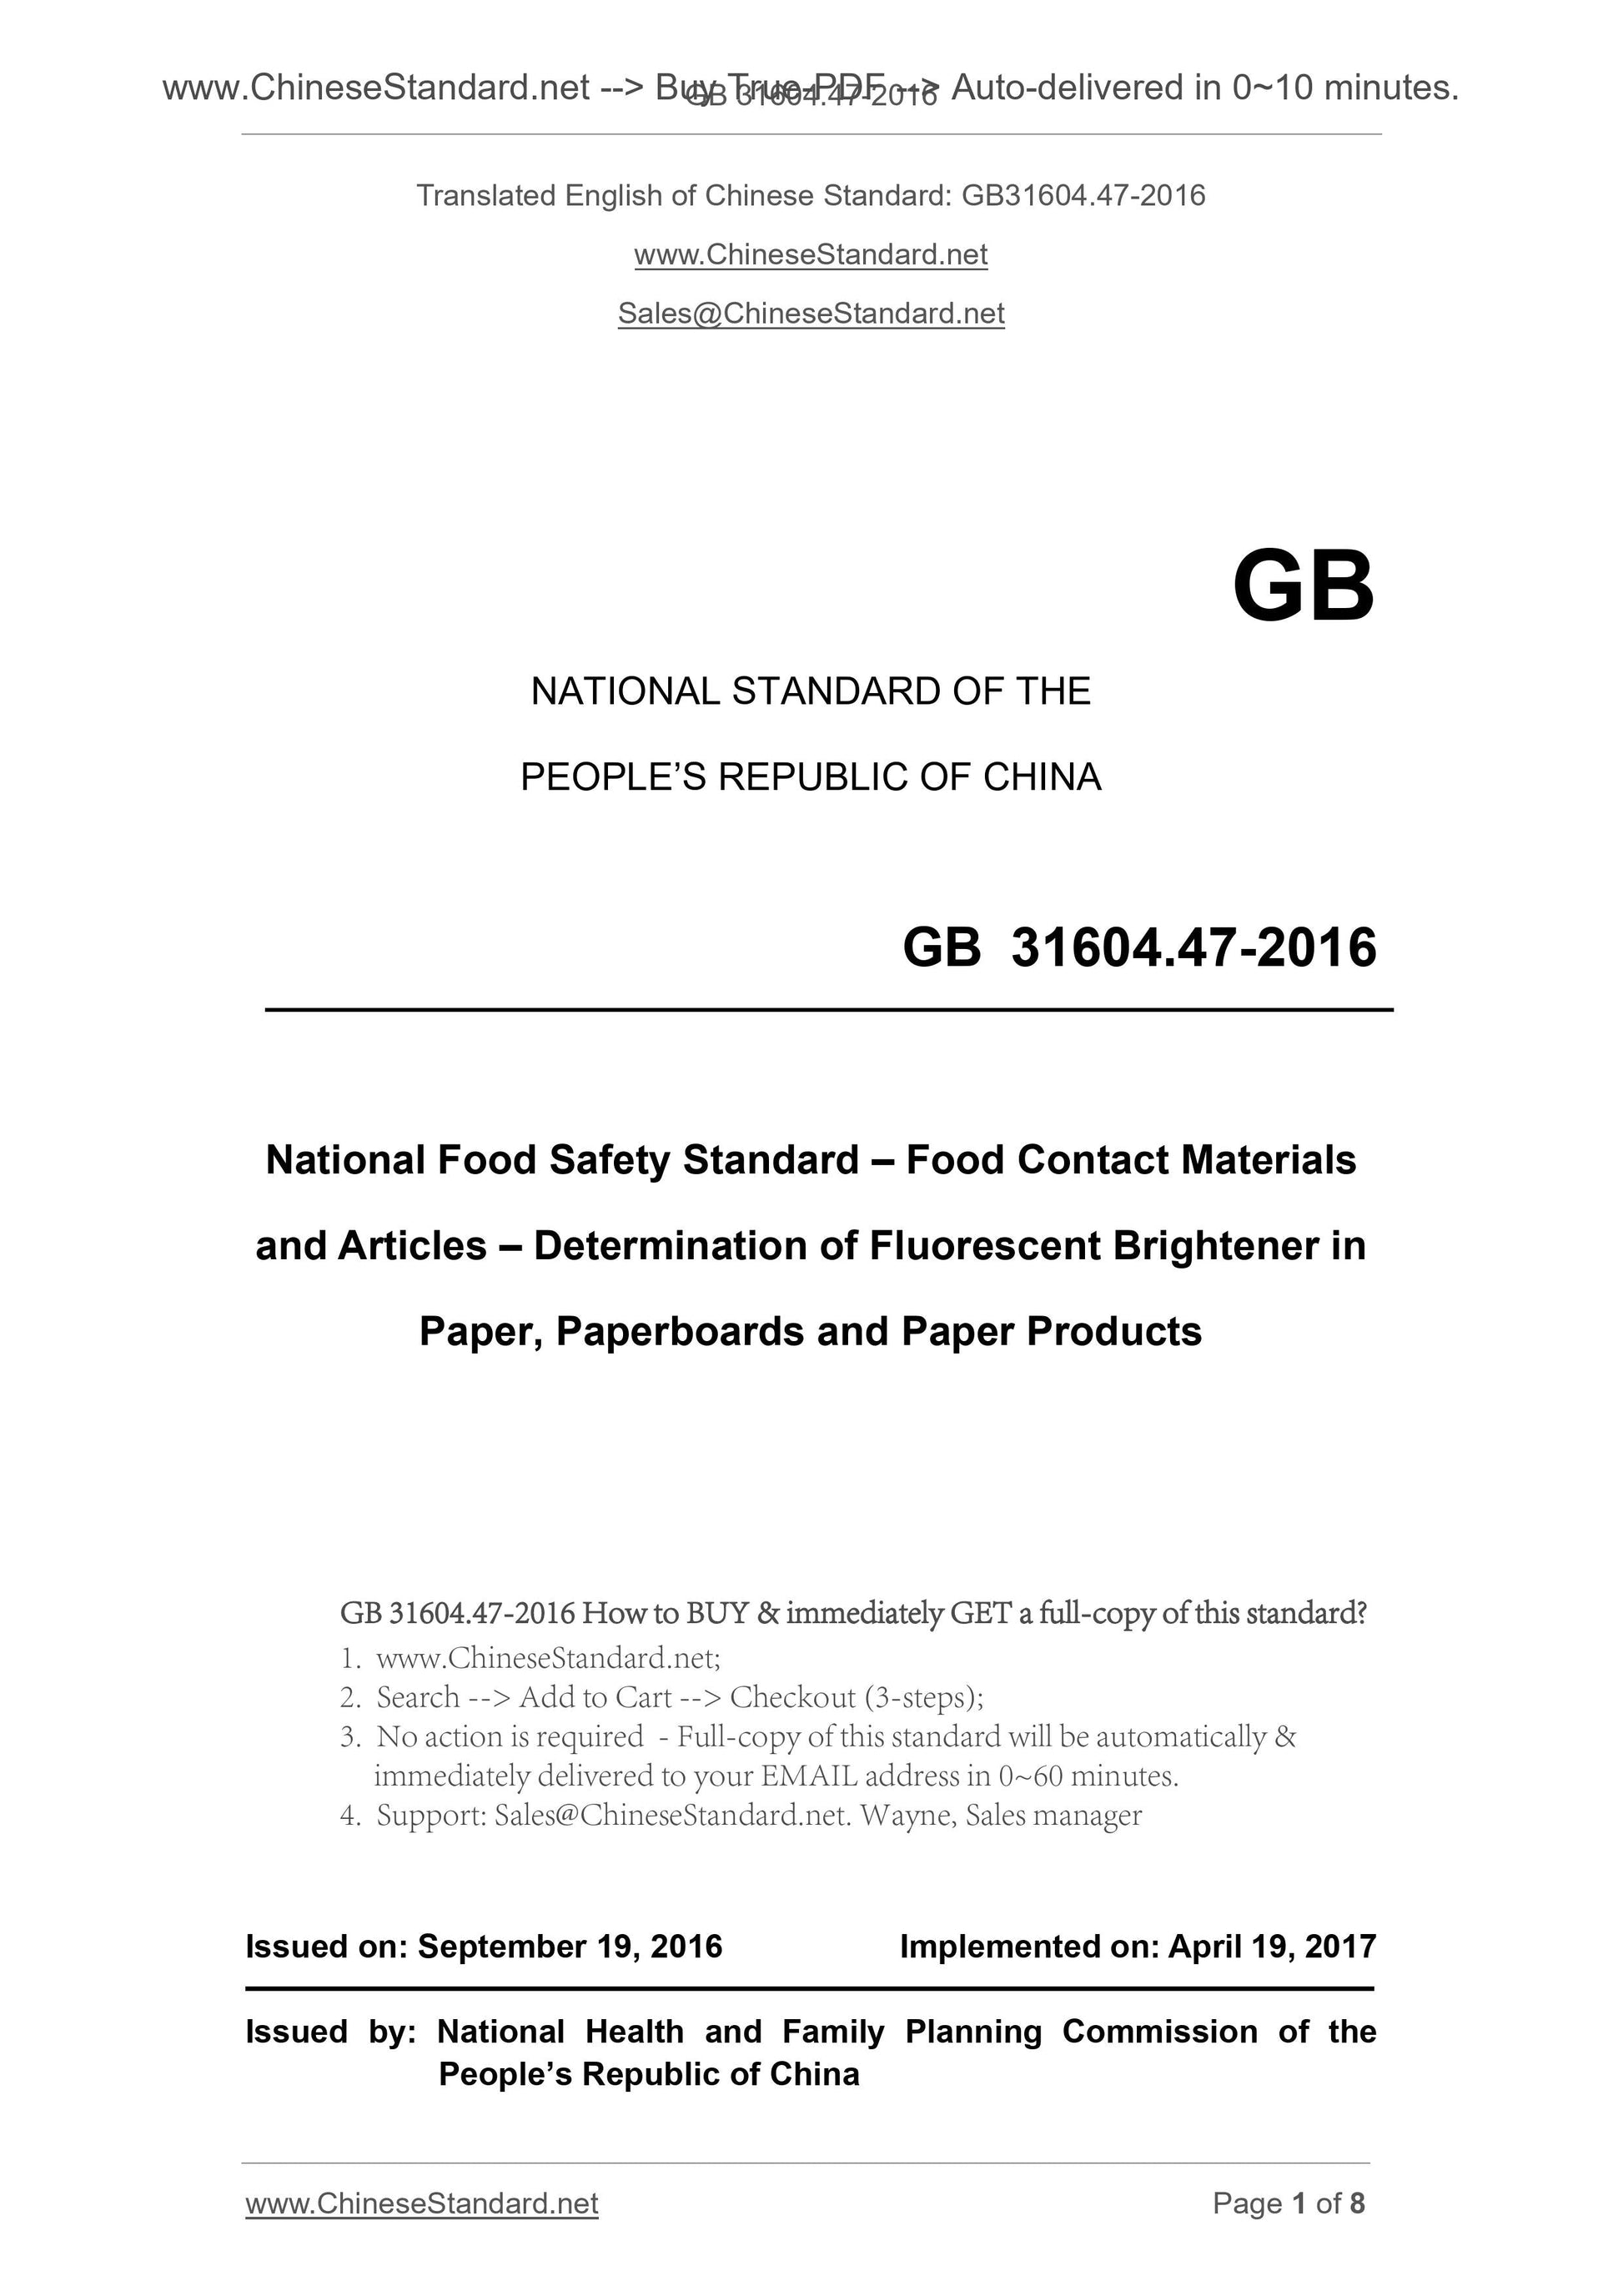 GB 31604.47-2016 Page 1